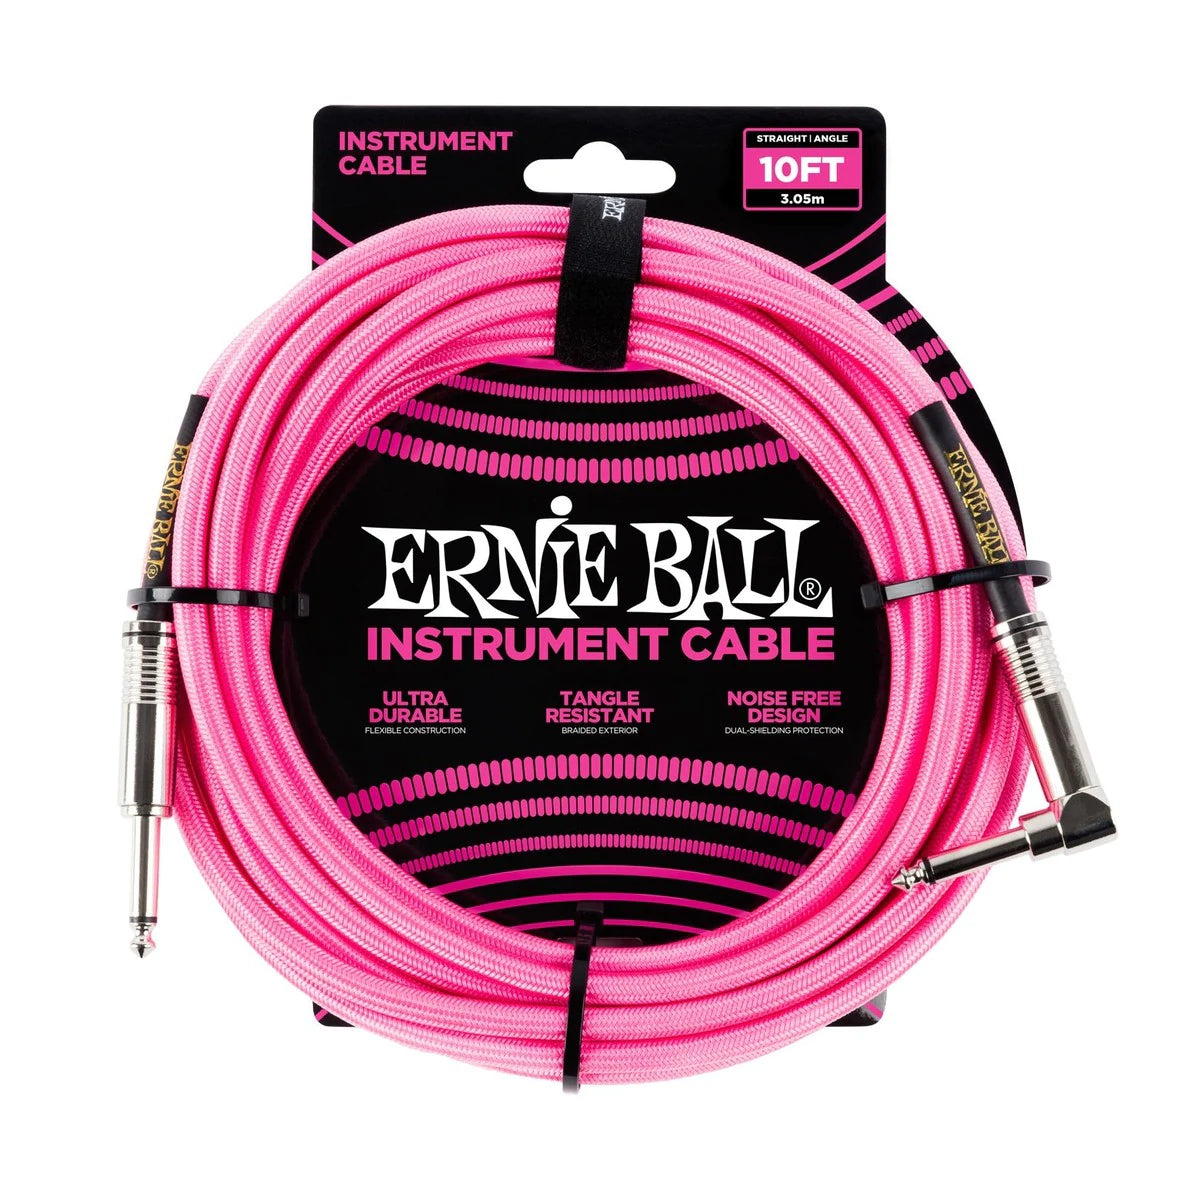 Ernie Ball Braided Instrument Cable in Neon Pink - Straight/Angle